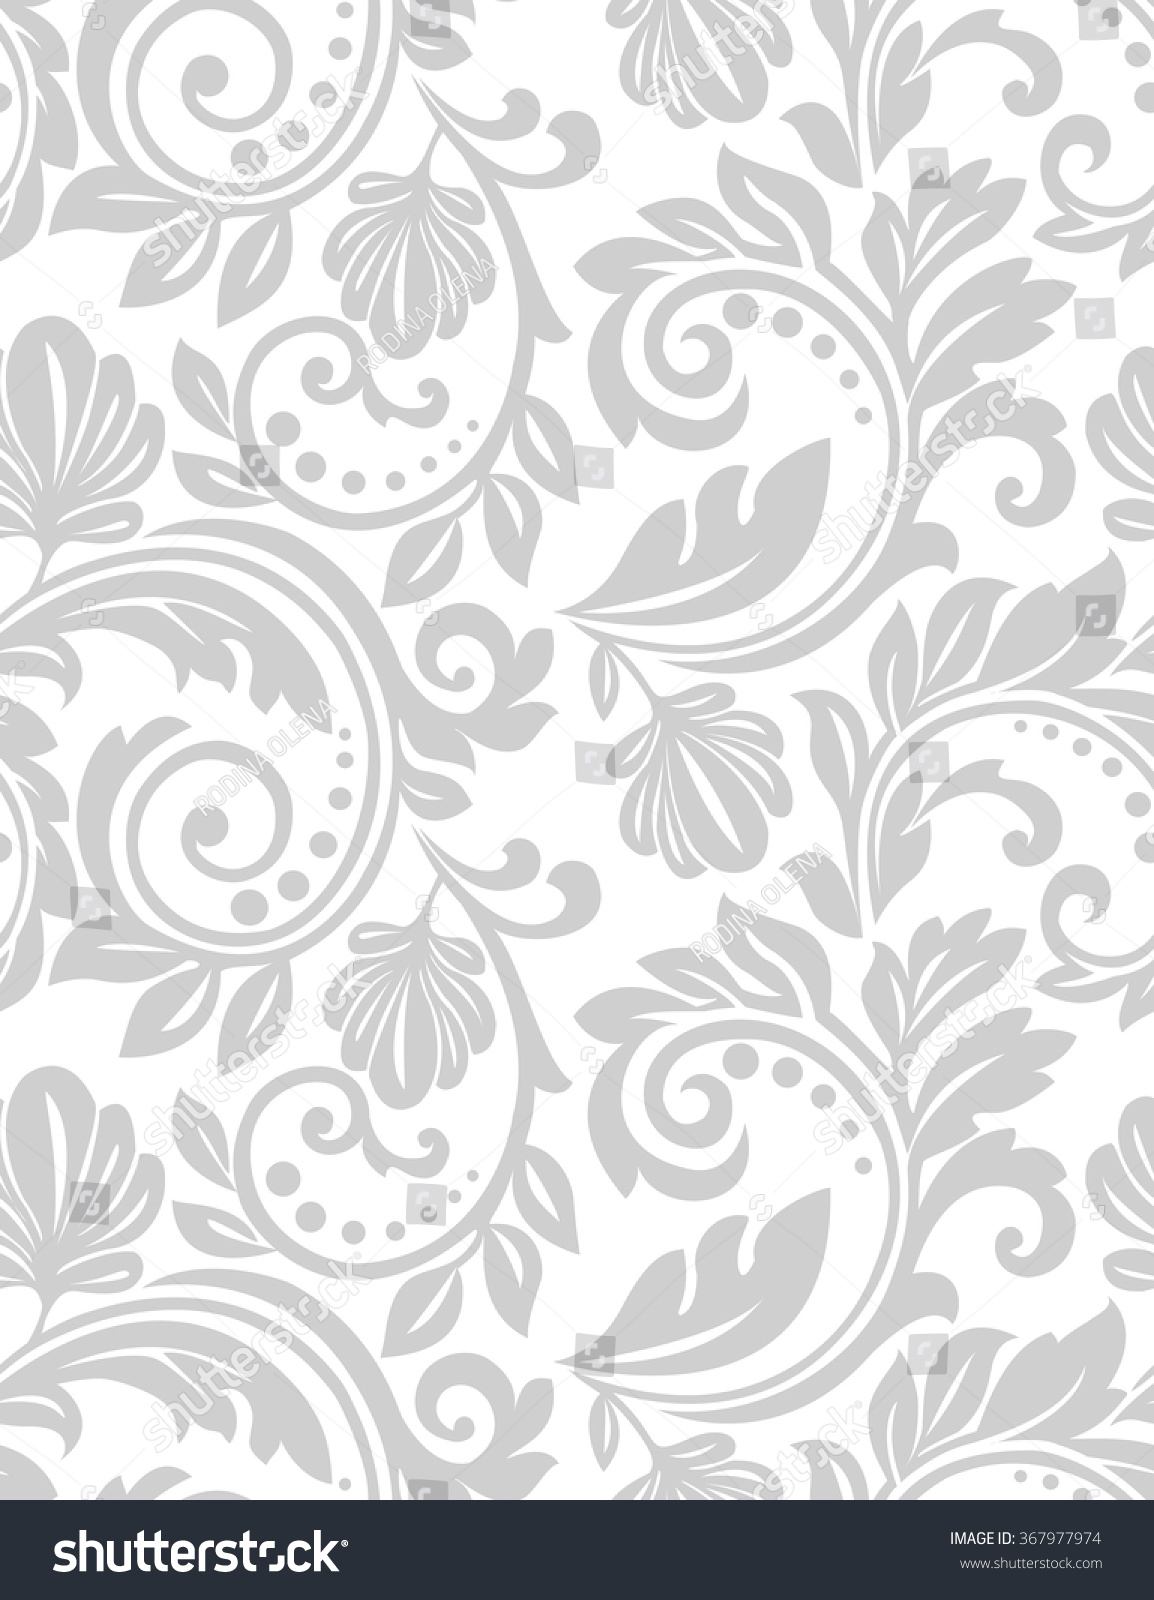 Wallpaper In The Style Of Baroque. A Seamless Vector Background. Gray ...